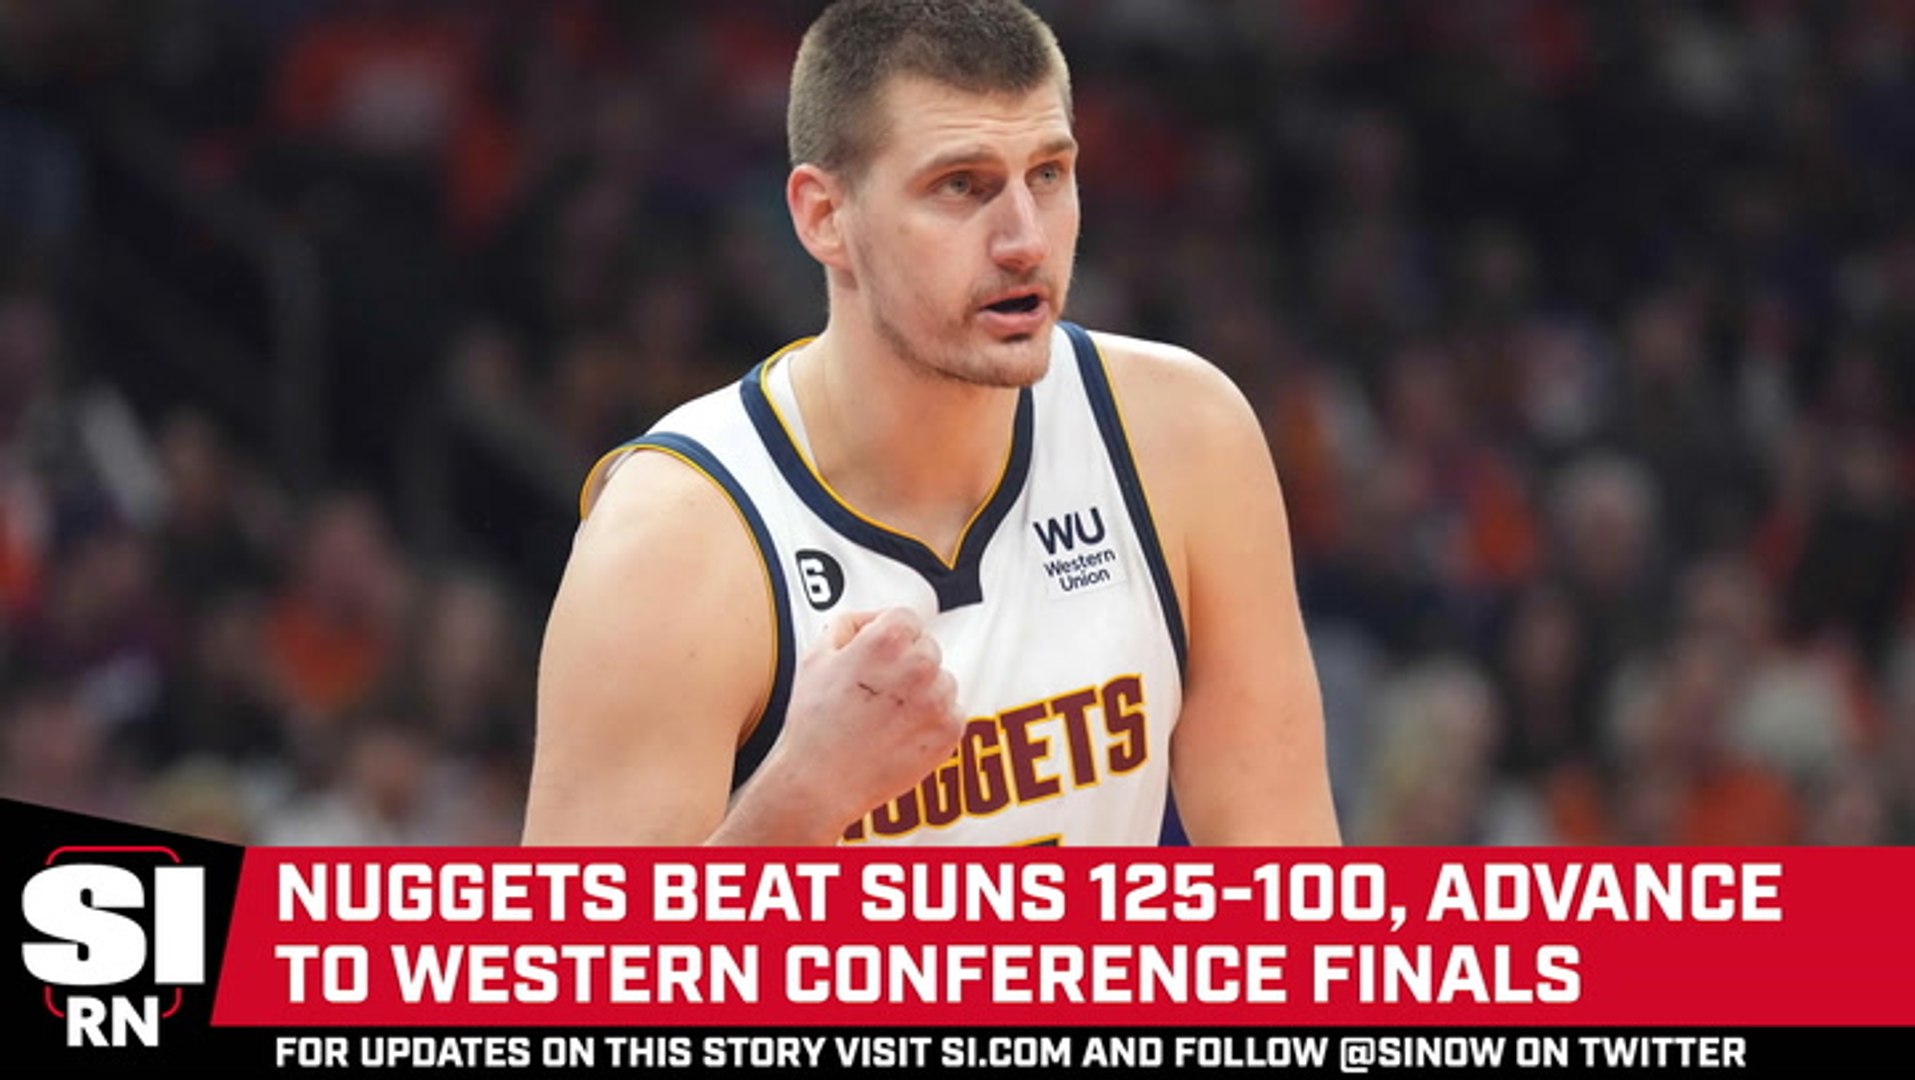 DOMINATION. NUGGETS ADVANCE PAST SUNS TO SECOND WESTERN CONFERENCE